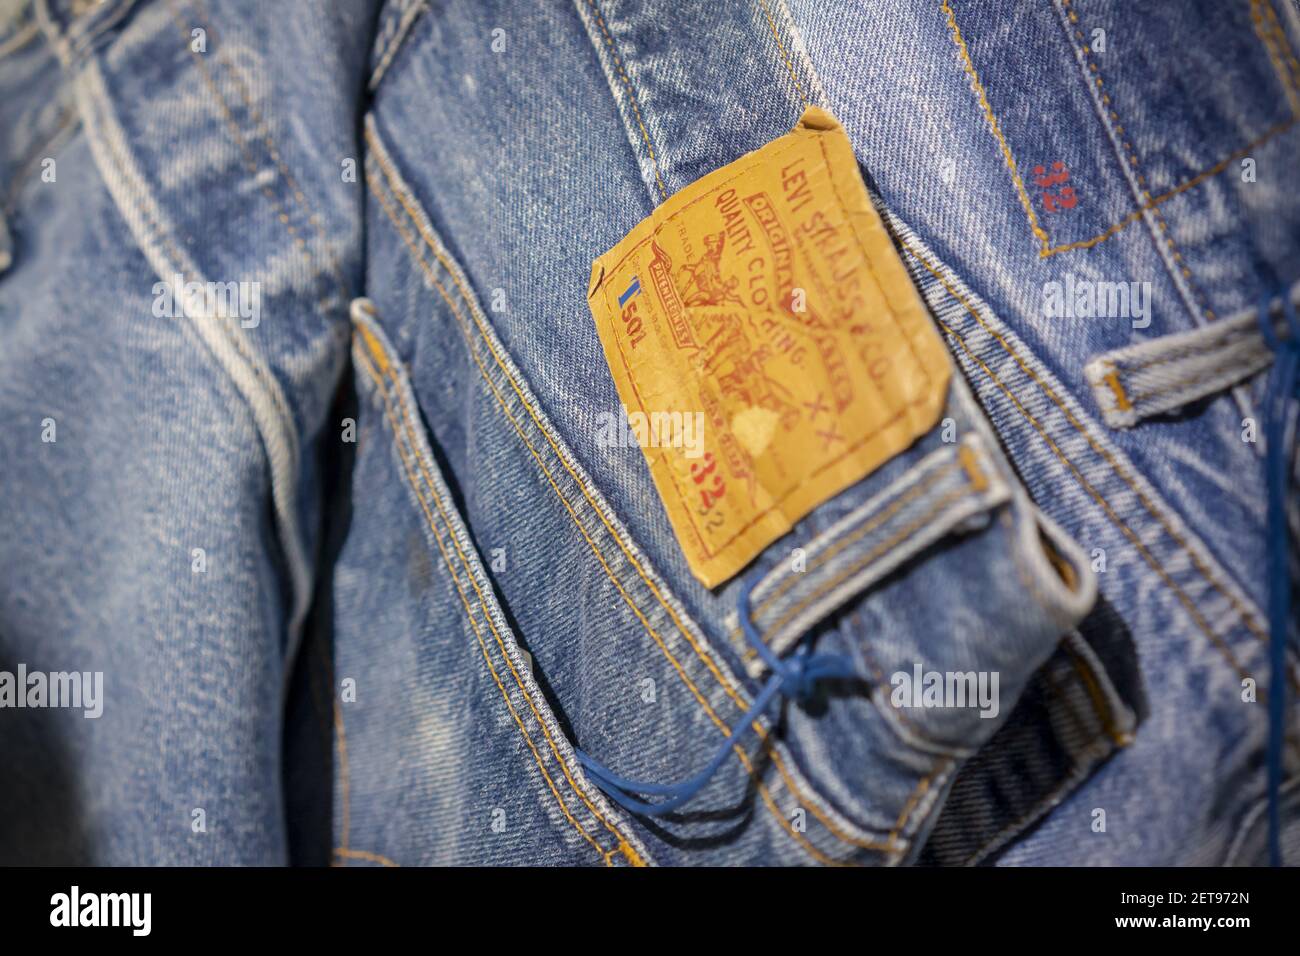 Vintage 501 jeans in the Levi Strauss and Co.'s new flagship Times Square in New York on its grand opening day, Friday, November 16, Levi Strauss and Co. is